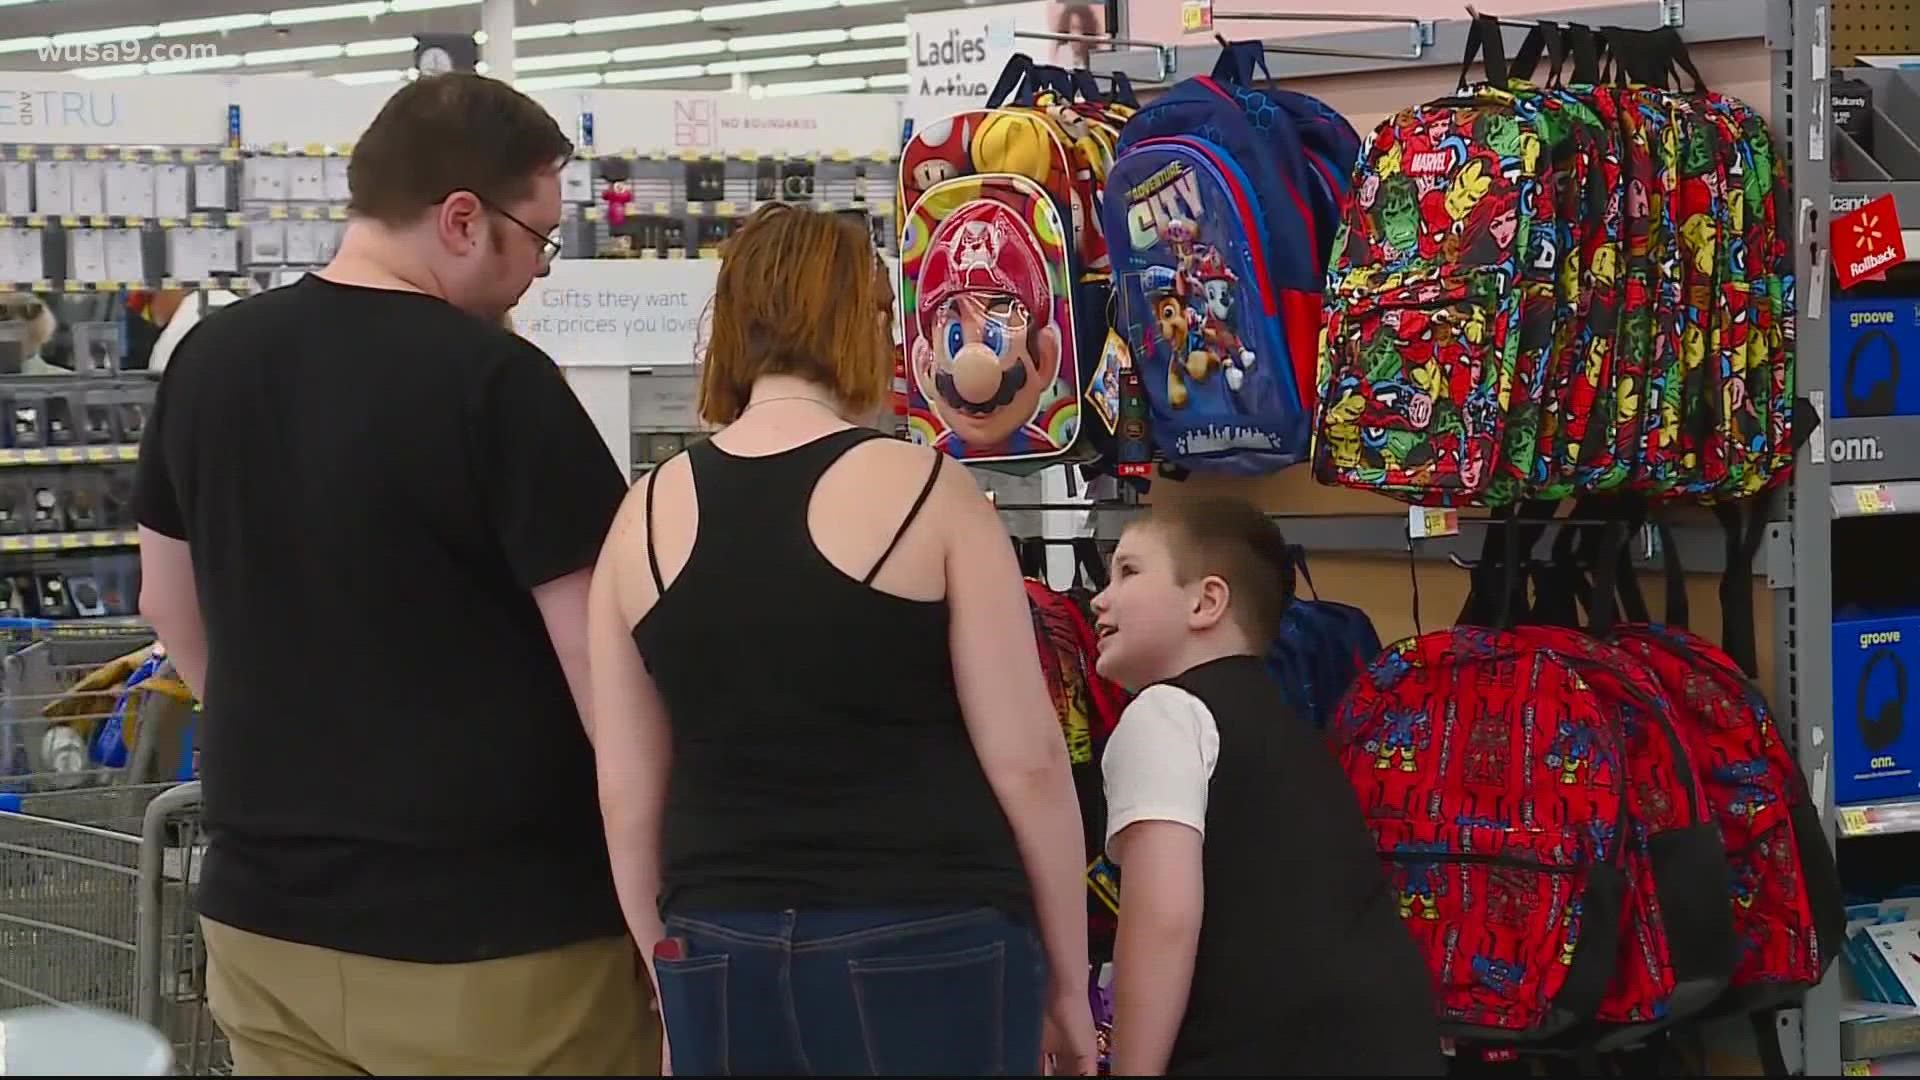 According to a recent National Retail Federation survey, back-to-school spending across the country could reach its highest mark in the survey's history.